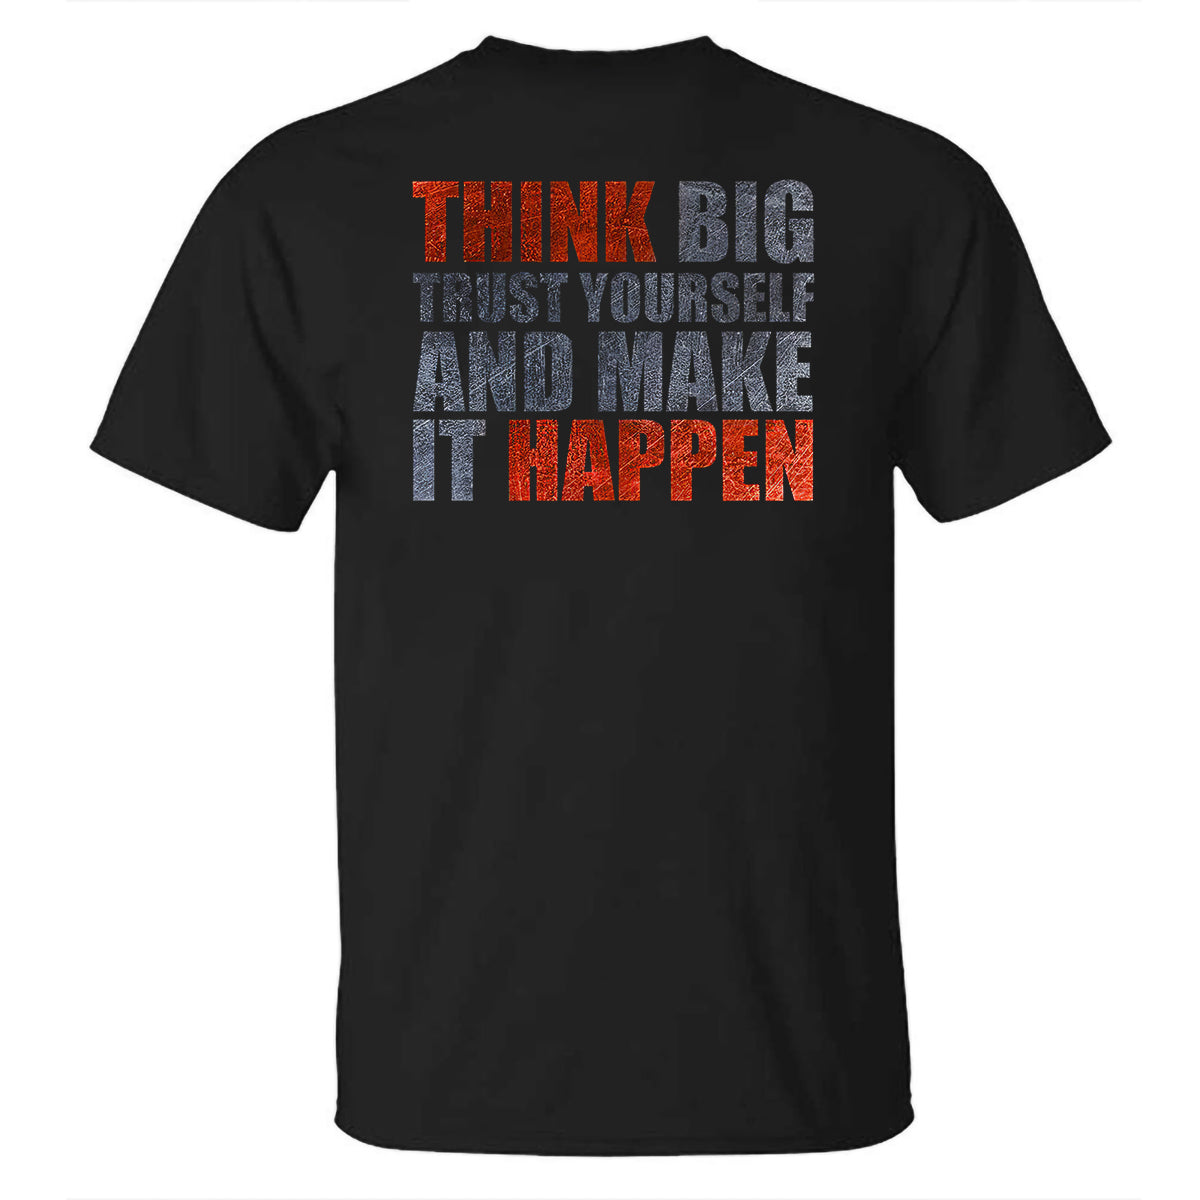 Think Big Trust Yourself And Make It Happen Printed T-shirt